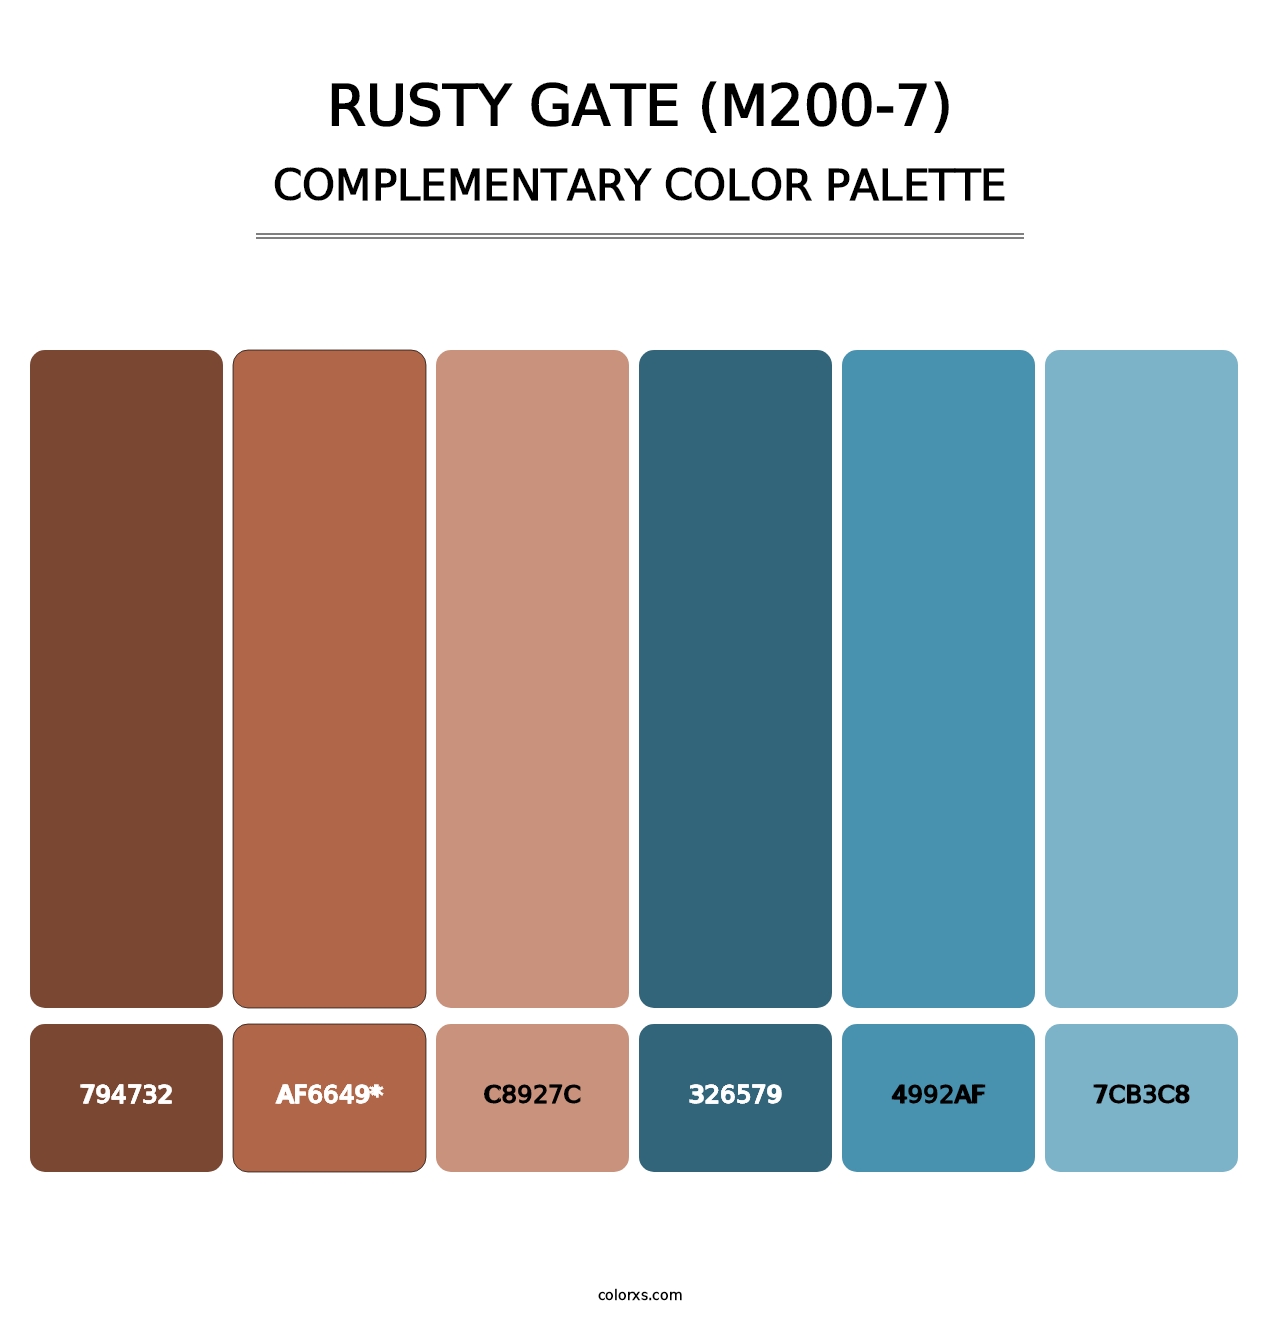 Rusty Gate (M200-7) - Complementary Color Palette